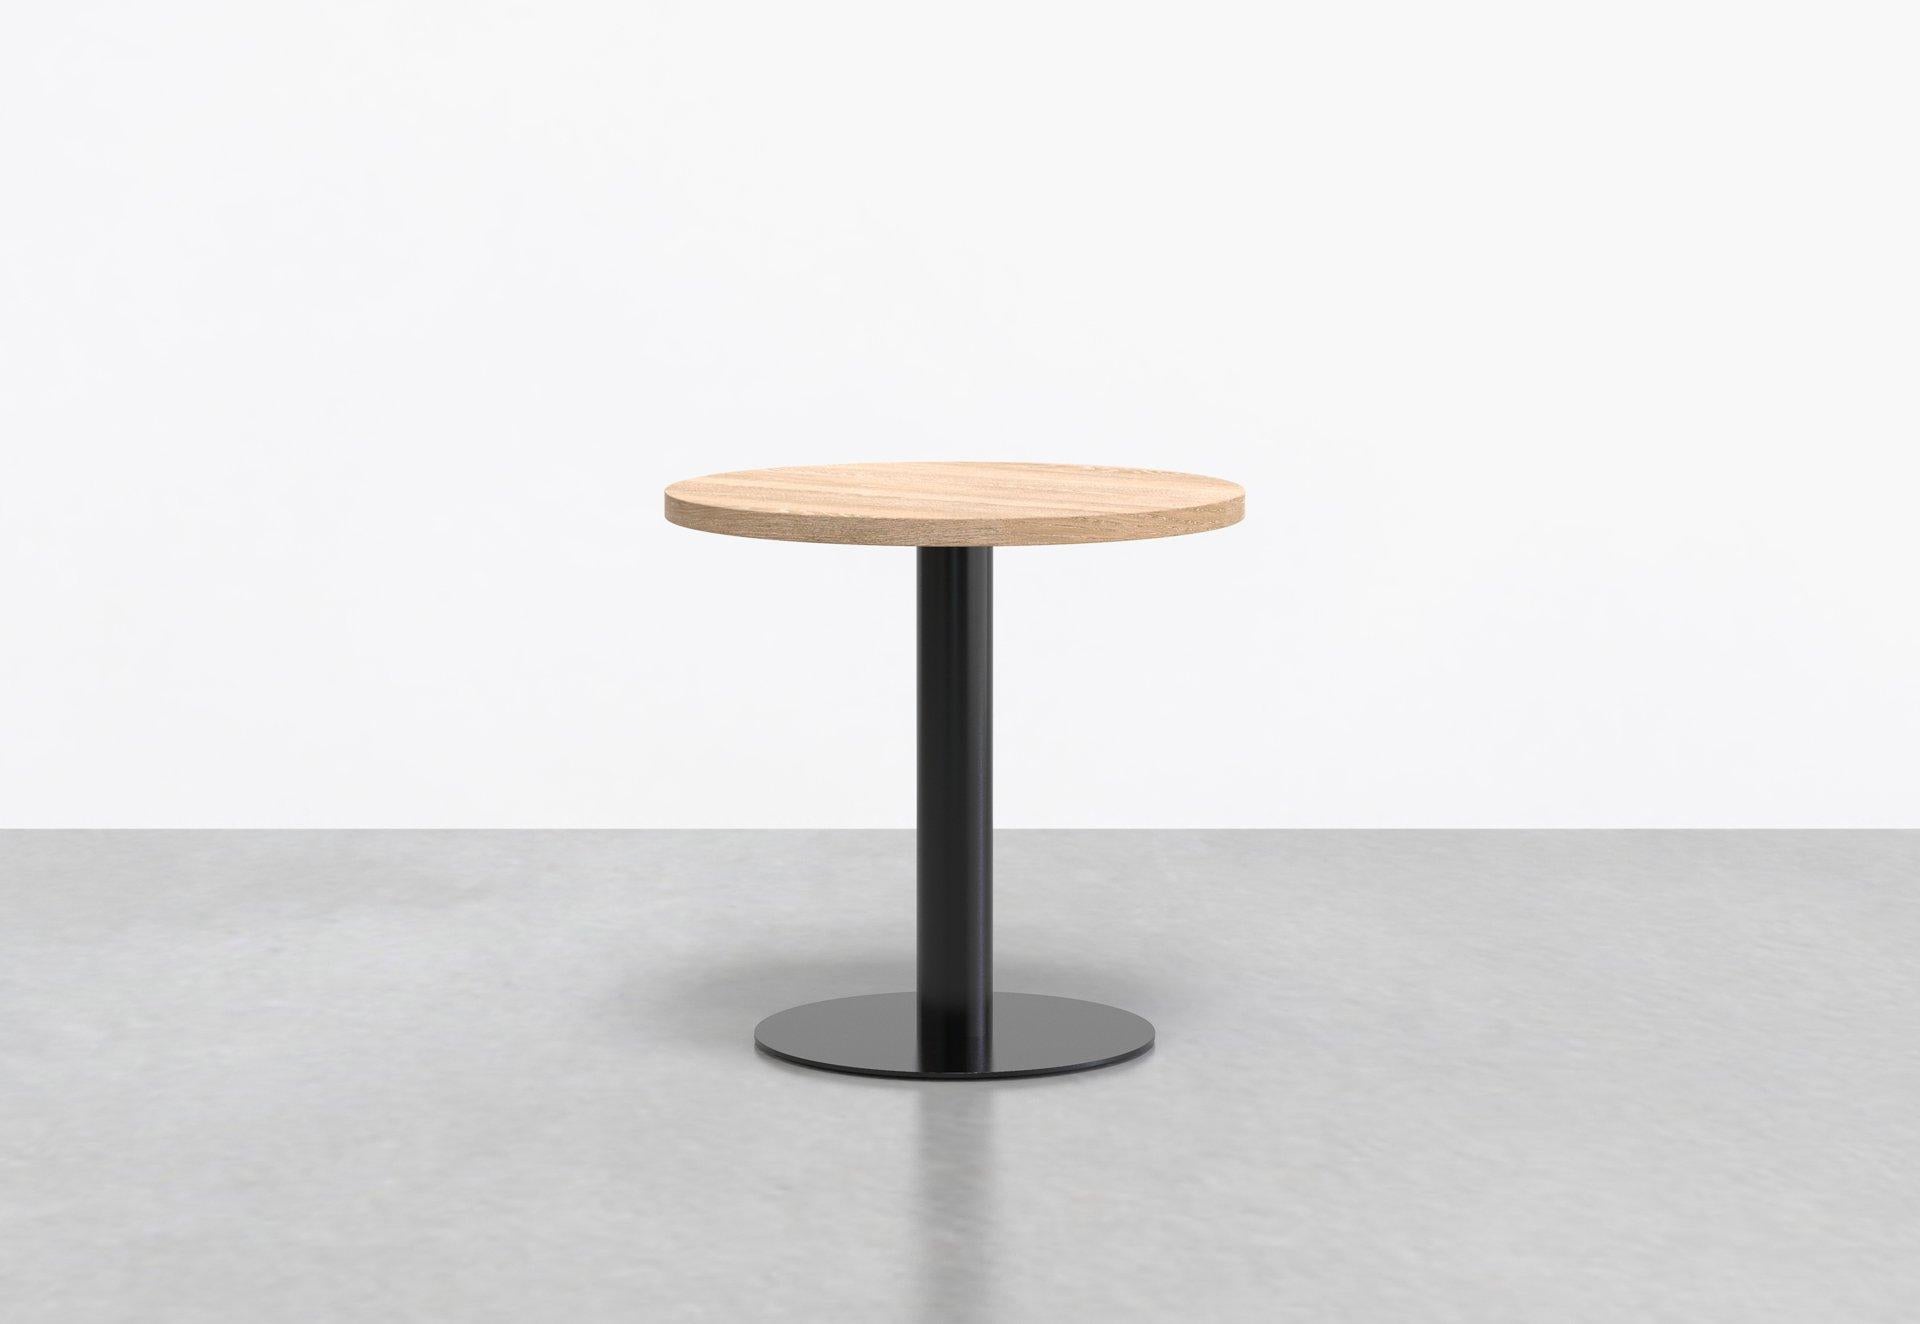 The cafe version of our larger Mast tables, the Mast cafe is a modern cafe table designed for dining and common areas. Choose between round or square tops, paired with a cylindrical pedestal base, which tucks into smaller areas with ease.